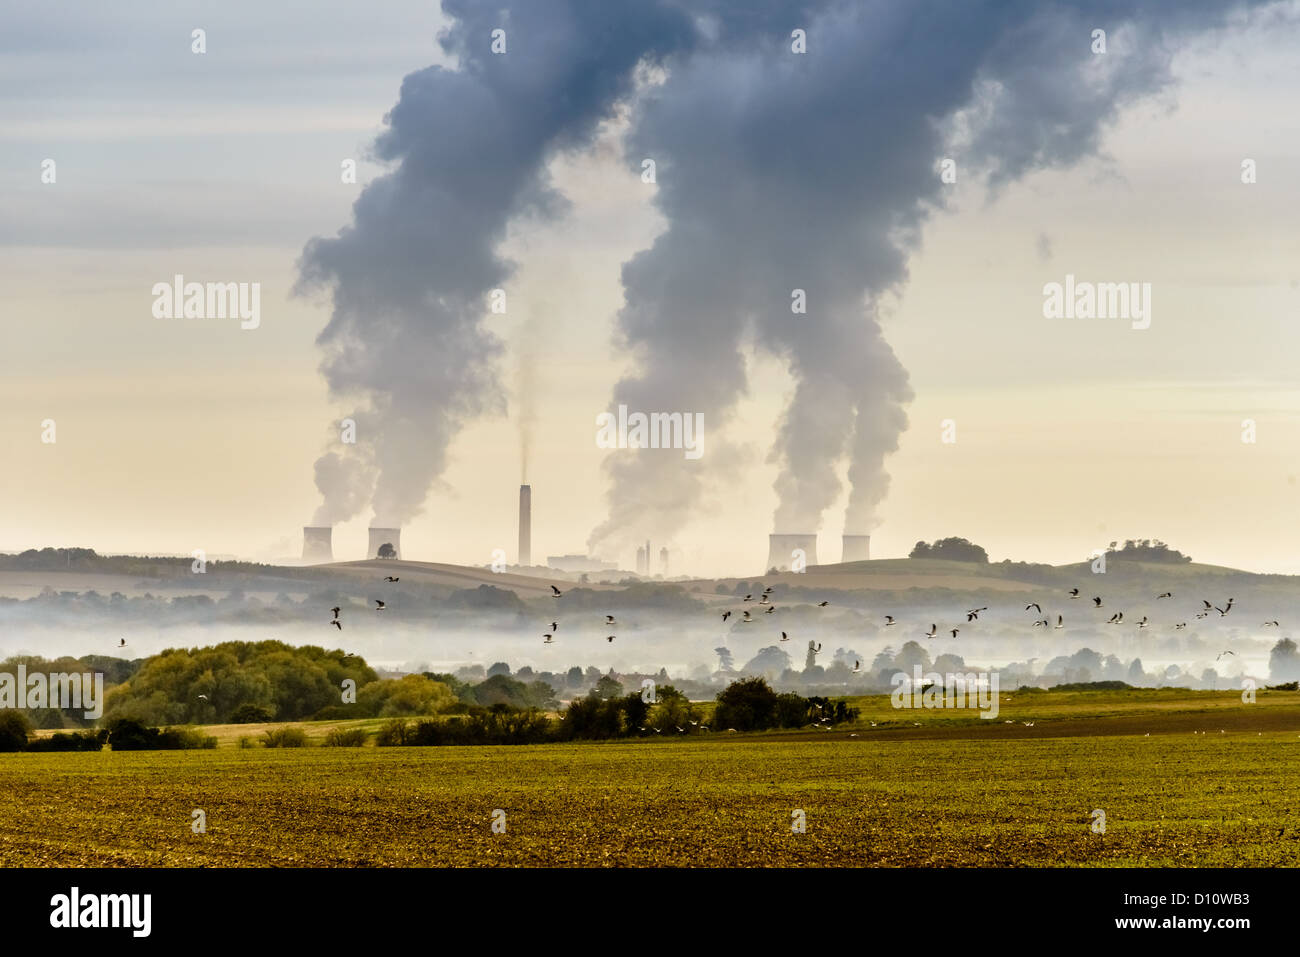 Distant view of Didcot Power Station with chimney emissions, contrasted against open fields and wildlife Stock Photo